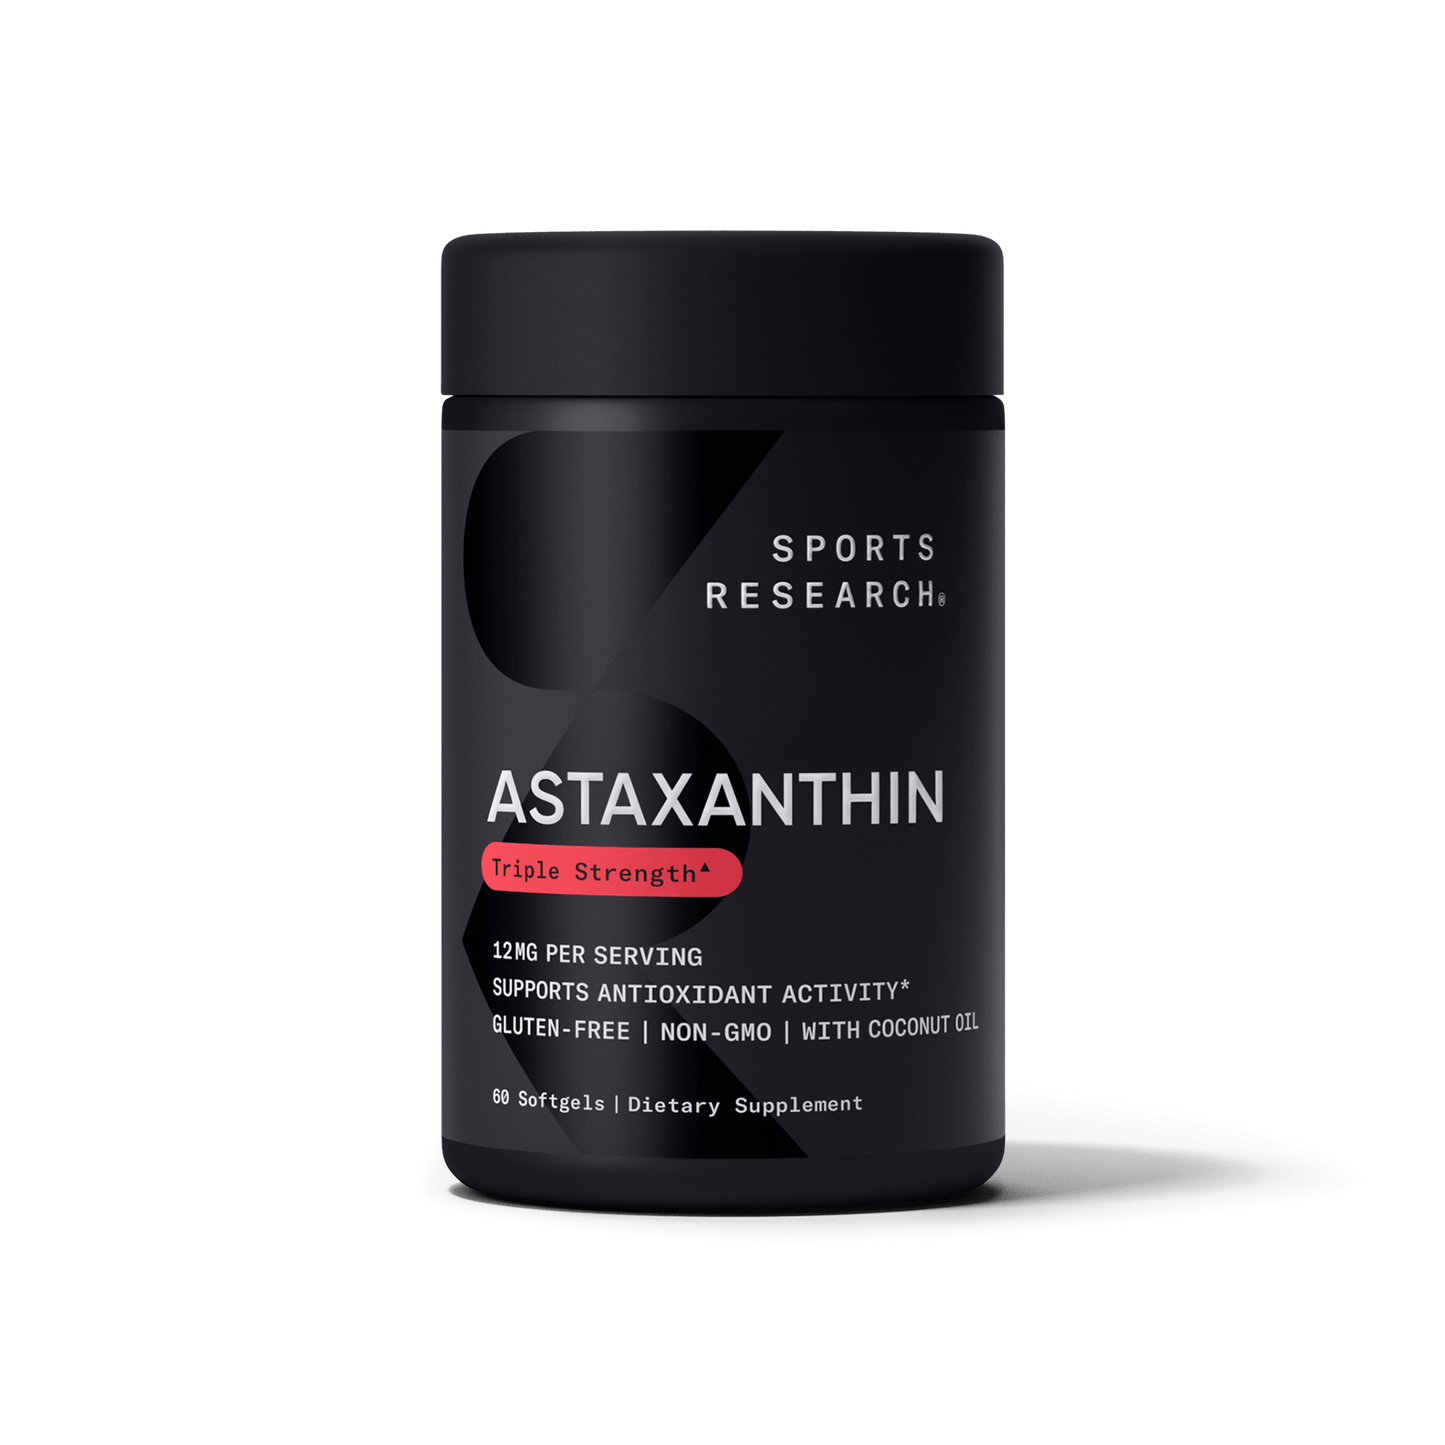 Triple Strength Astaxanthin with Coconut Oil - Sports Research.